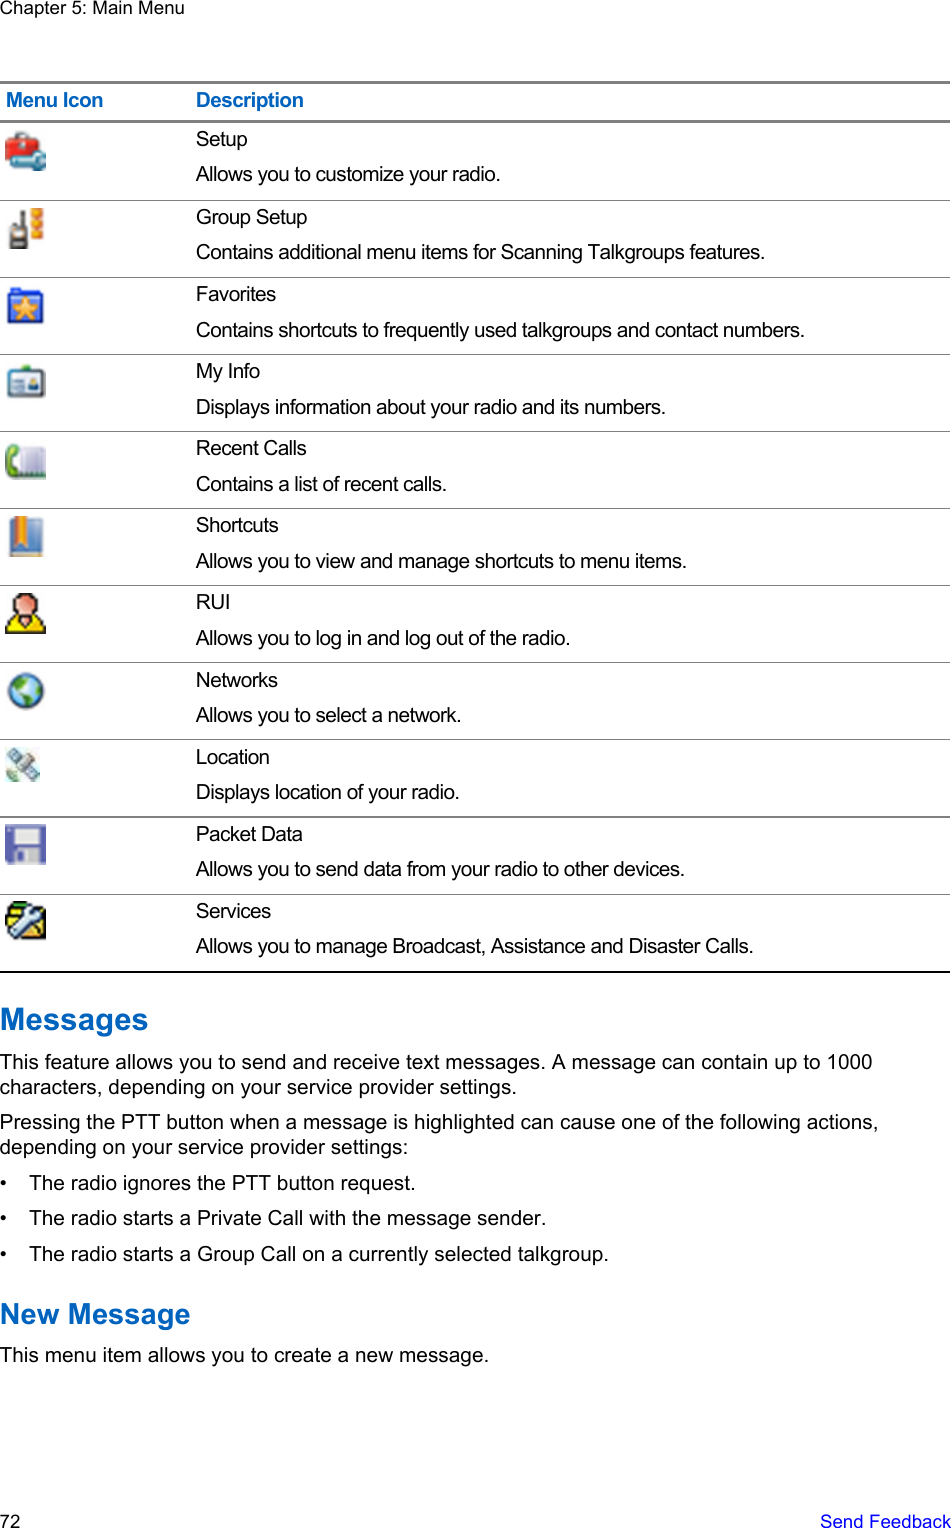 Menu Icon DescriptionSetupAllows you to customize your radio.Group SetupContains additional menu items for Scanning Talkgroups features.FavoritesContains shortcuts to frequently used talkgroups and contact numbers.My InfoDisplays information about your radio and its numbers.Recent CallsContains a list of recent calls.ShortcutsAllows you to view and manage shortcuts to menu items.RUIAllows you to log in and log out of the radio.NetworksAllows you to select a network.LocationDisplays location of your radio.Packet DataAllows you to send data from your radio to other devices.ServicesAllows you to manage Broadcast, Assistance and Disaster Calls.MessagesThis feature allows you to send and receive text messages. A message can contain up to 1000characters, depending on your service provider settings.Pressing the PTT button when a message is highlighted can cause one of the following actions,depending on your service provider settings:• The radio ignores the PTT button request.• The radio starts a Private Call with the message sender.• The radio starts a Group Call on a currently selected talkgroup.New MessageThis menu item allows you to create a new message.Chapter 5: Main Menu72   Send Feedback